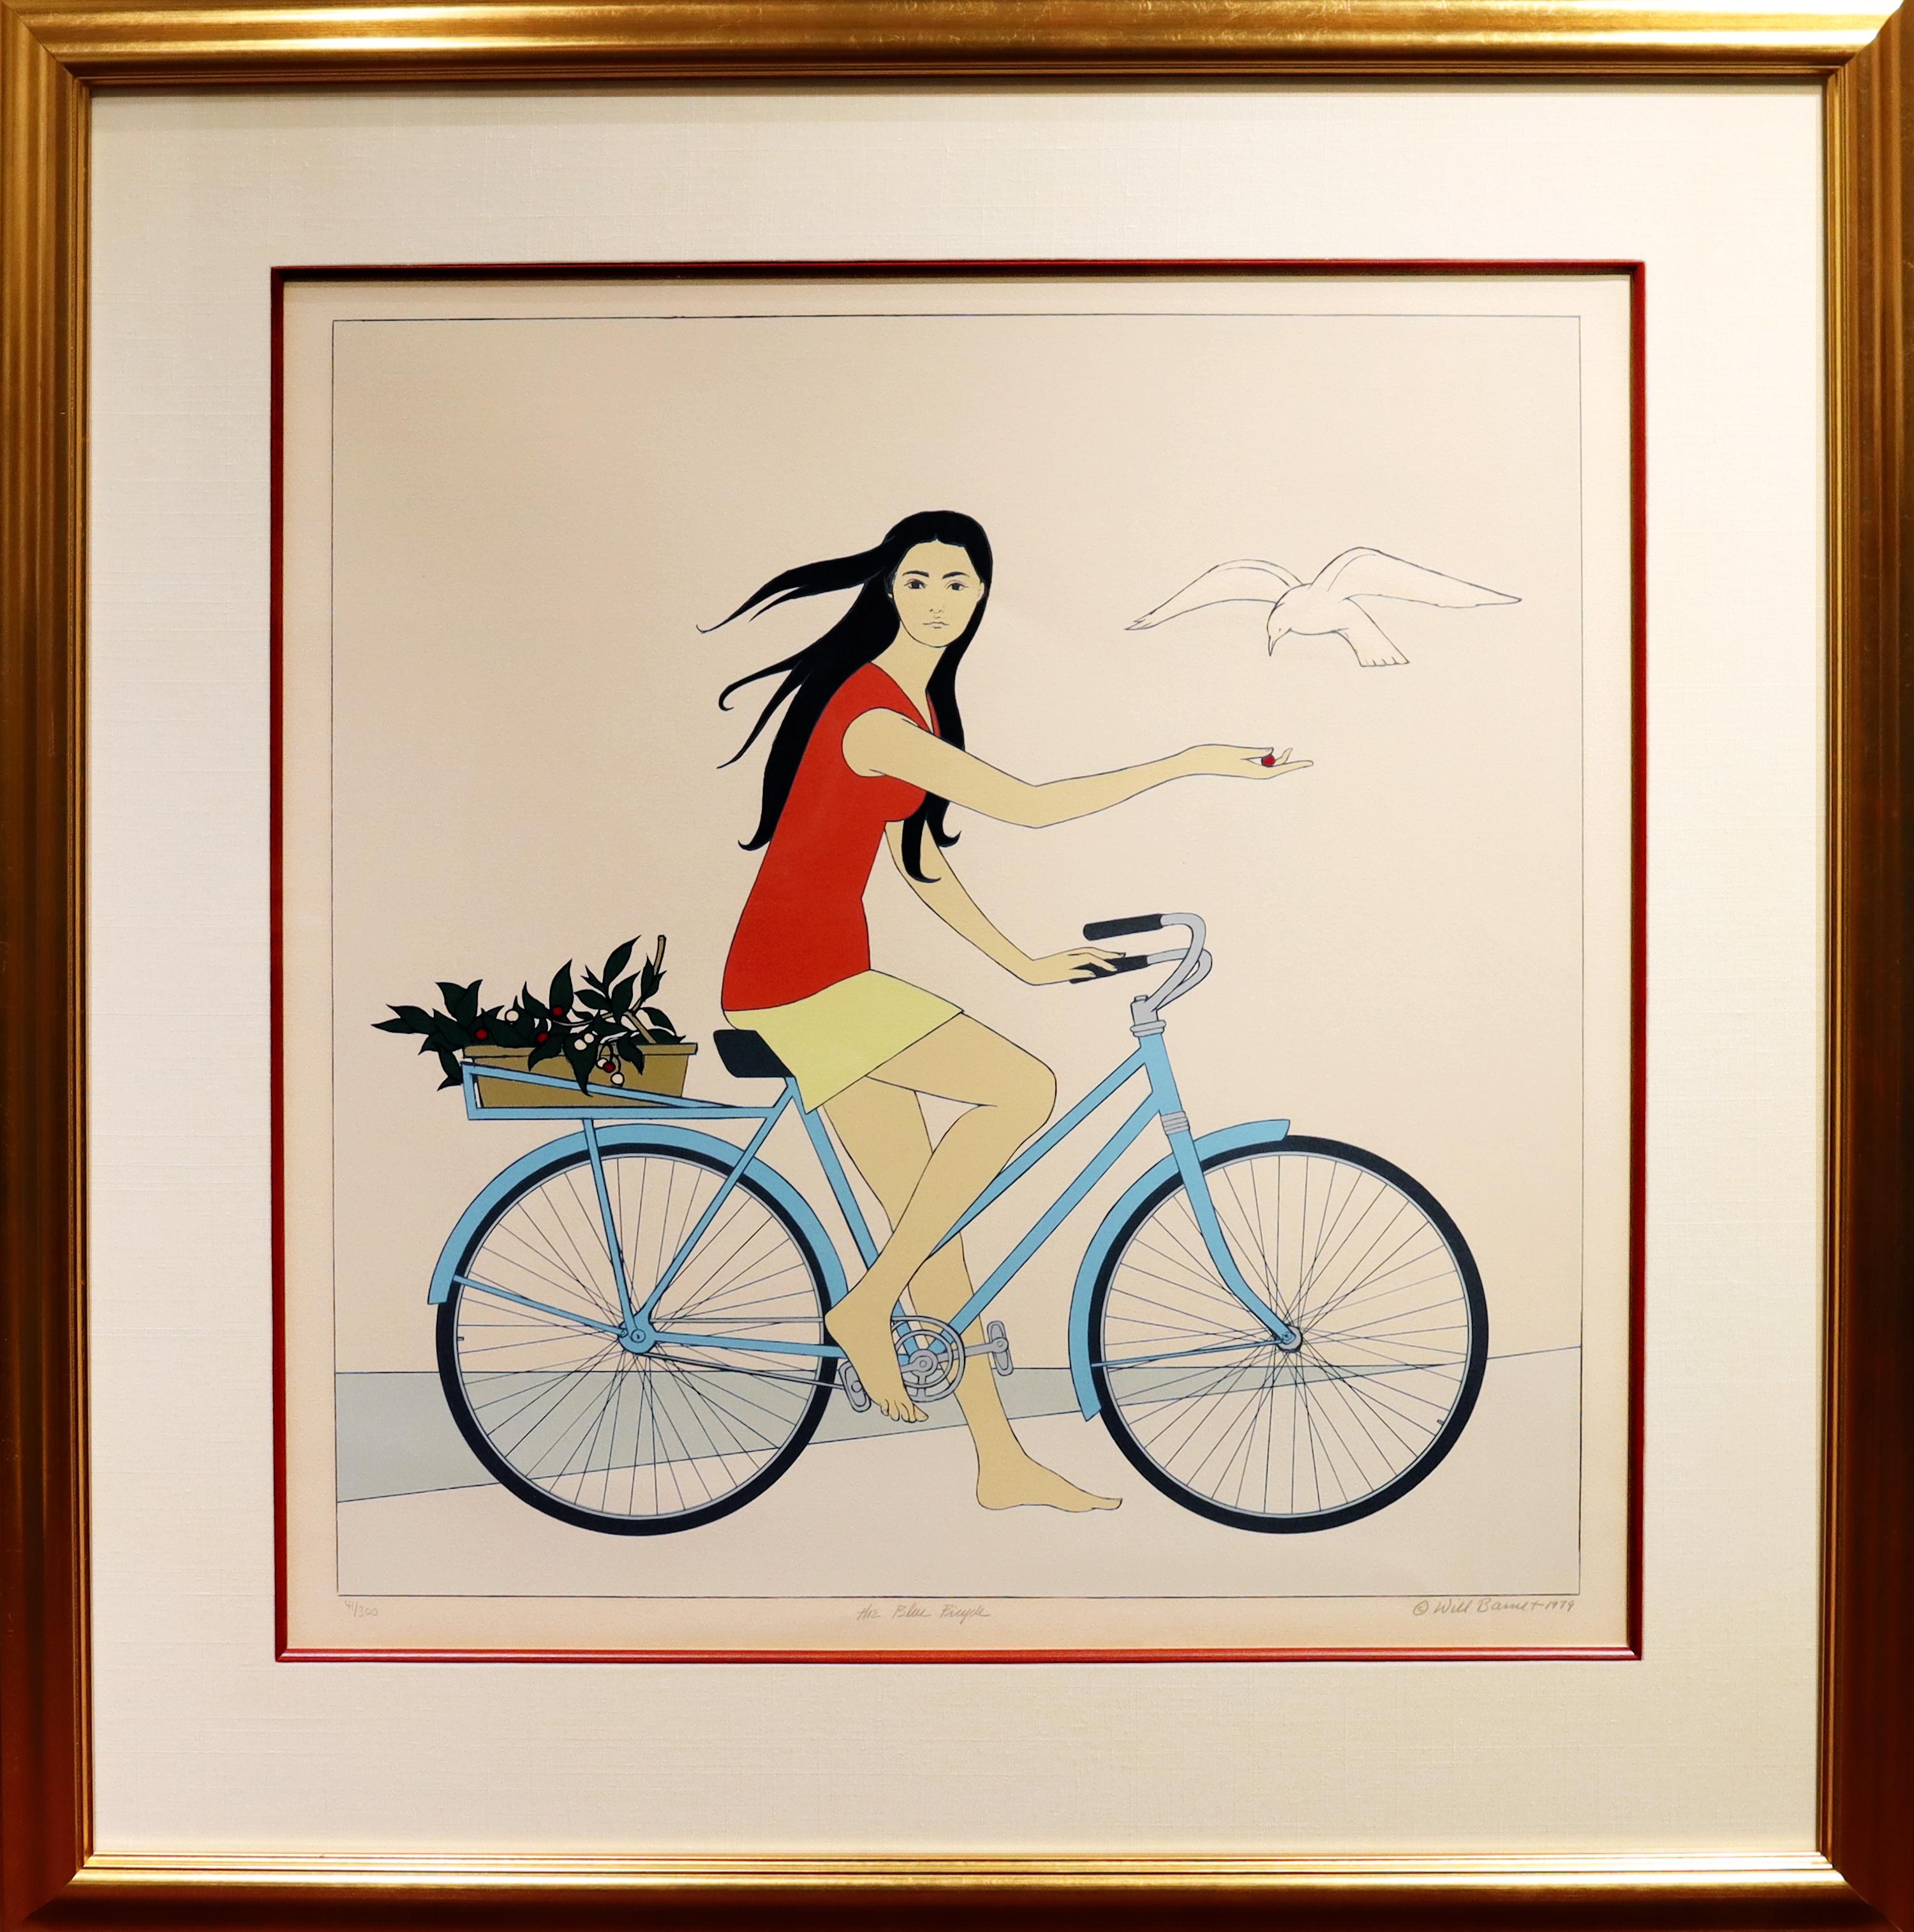 The Blue Bicycle - Print by Will Barnet